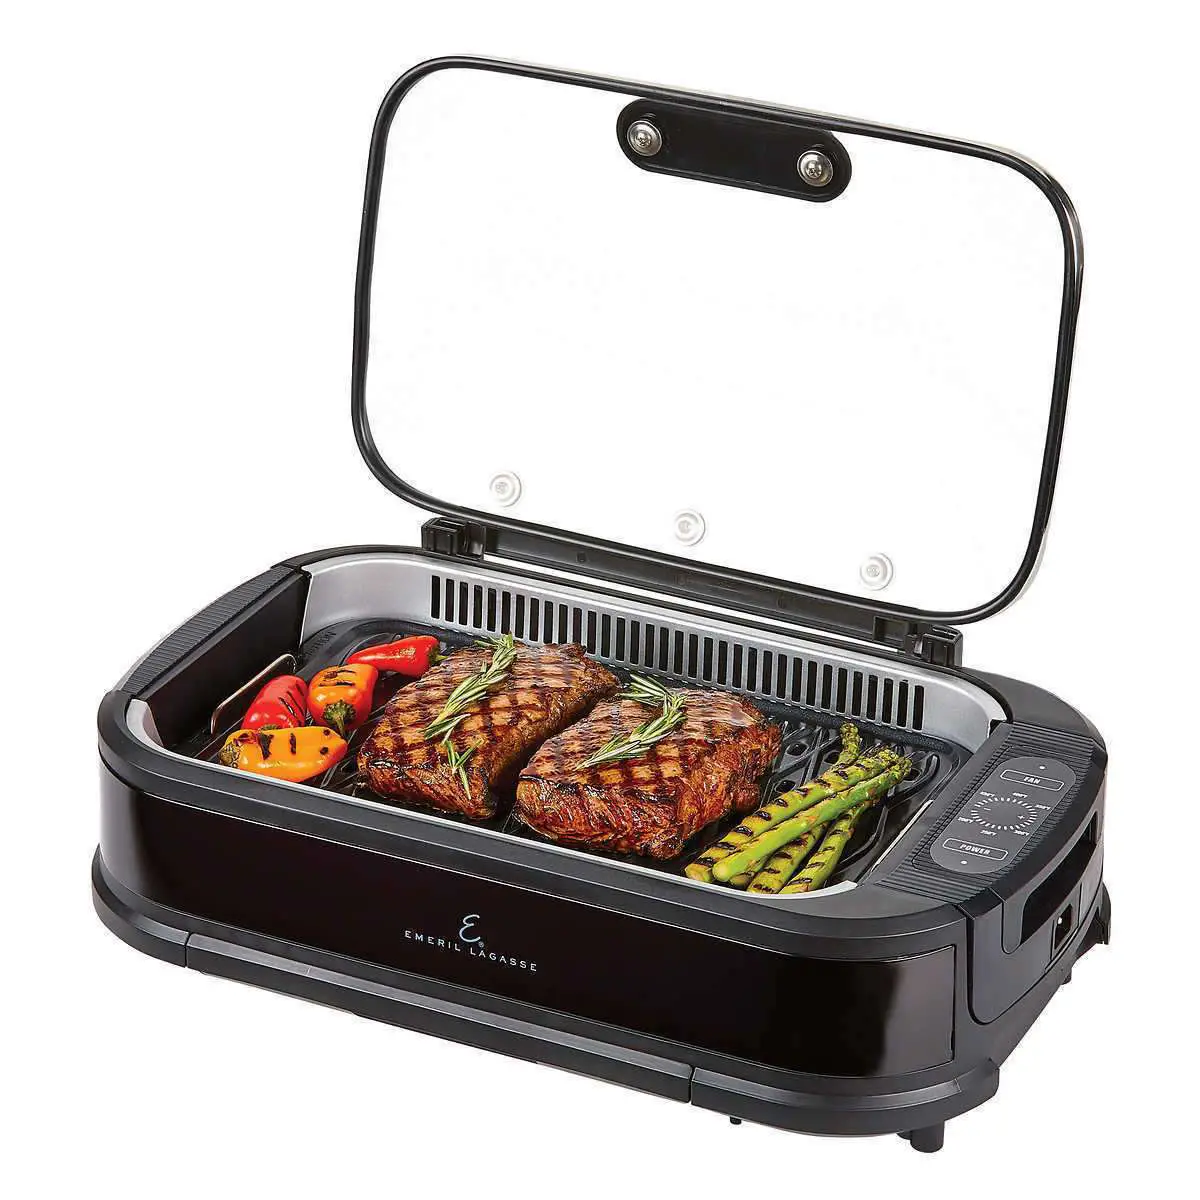 Emeril Lagasse Smokeless Electric Indoor Grill and Griddle